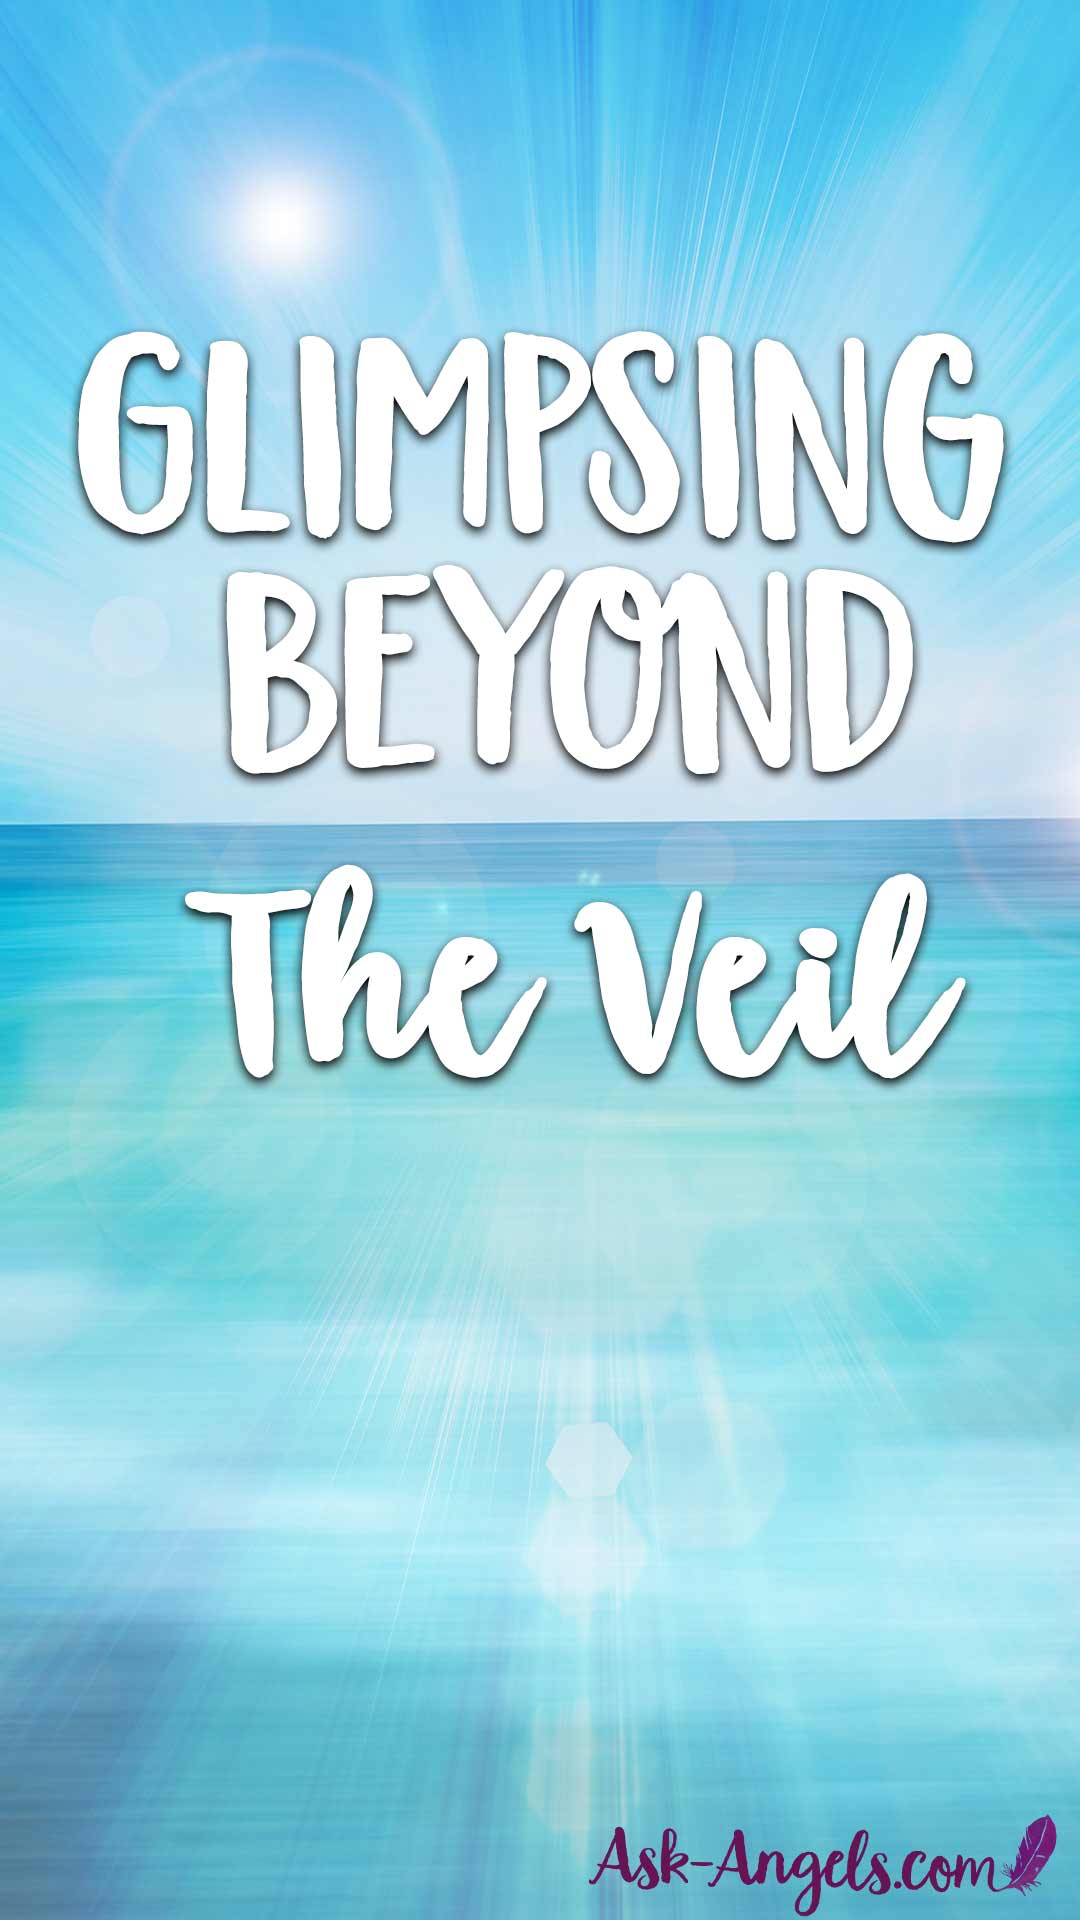 The Veil is Thin and Getting Thinner... Learn what this means and how to glimpse beyond The Veil here now!